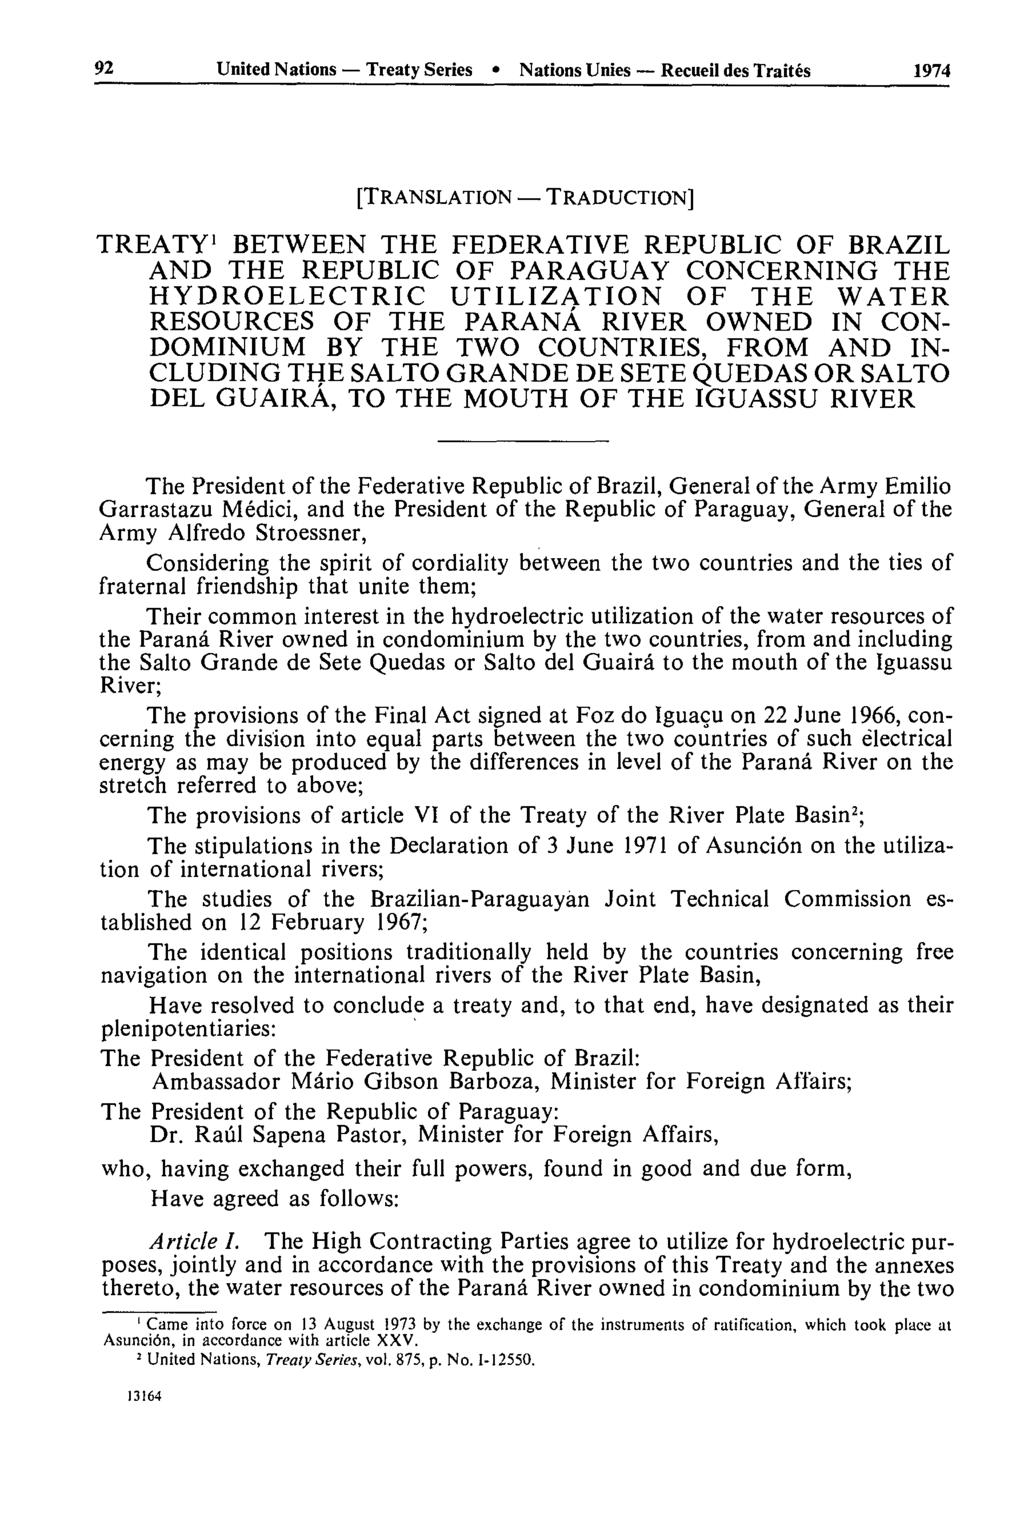 92 United Nations Treaty Series Nations Unies Recueil des Traités 1974 [TRANSLATION TRADUCTION] TREATY 1 BETWEEN THE FEDERATIVE REPUBLIC OF BRAZIL AND THE REPUBLIC OF PARAGUAY CONCERNING THE